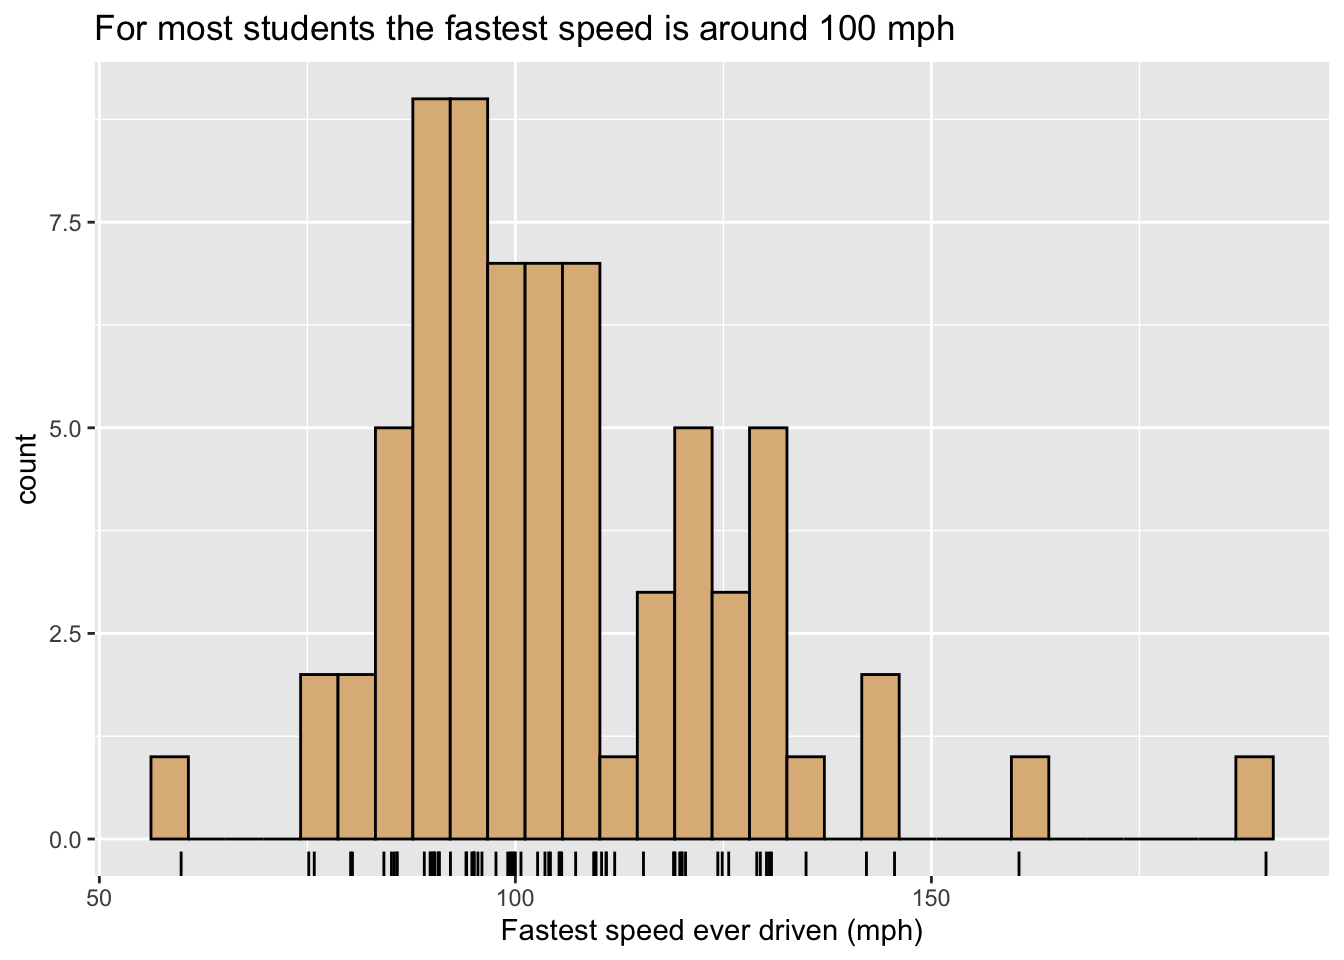 Histogram of the fastest speed ever driven.